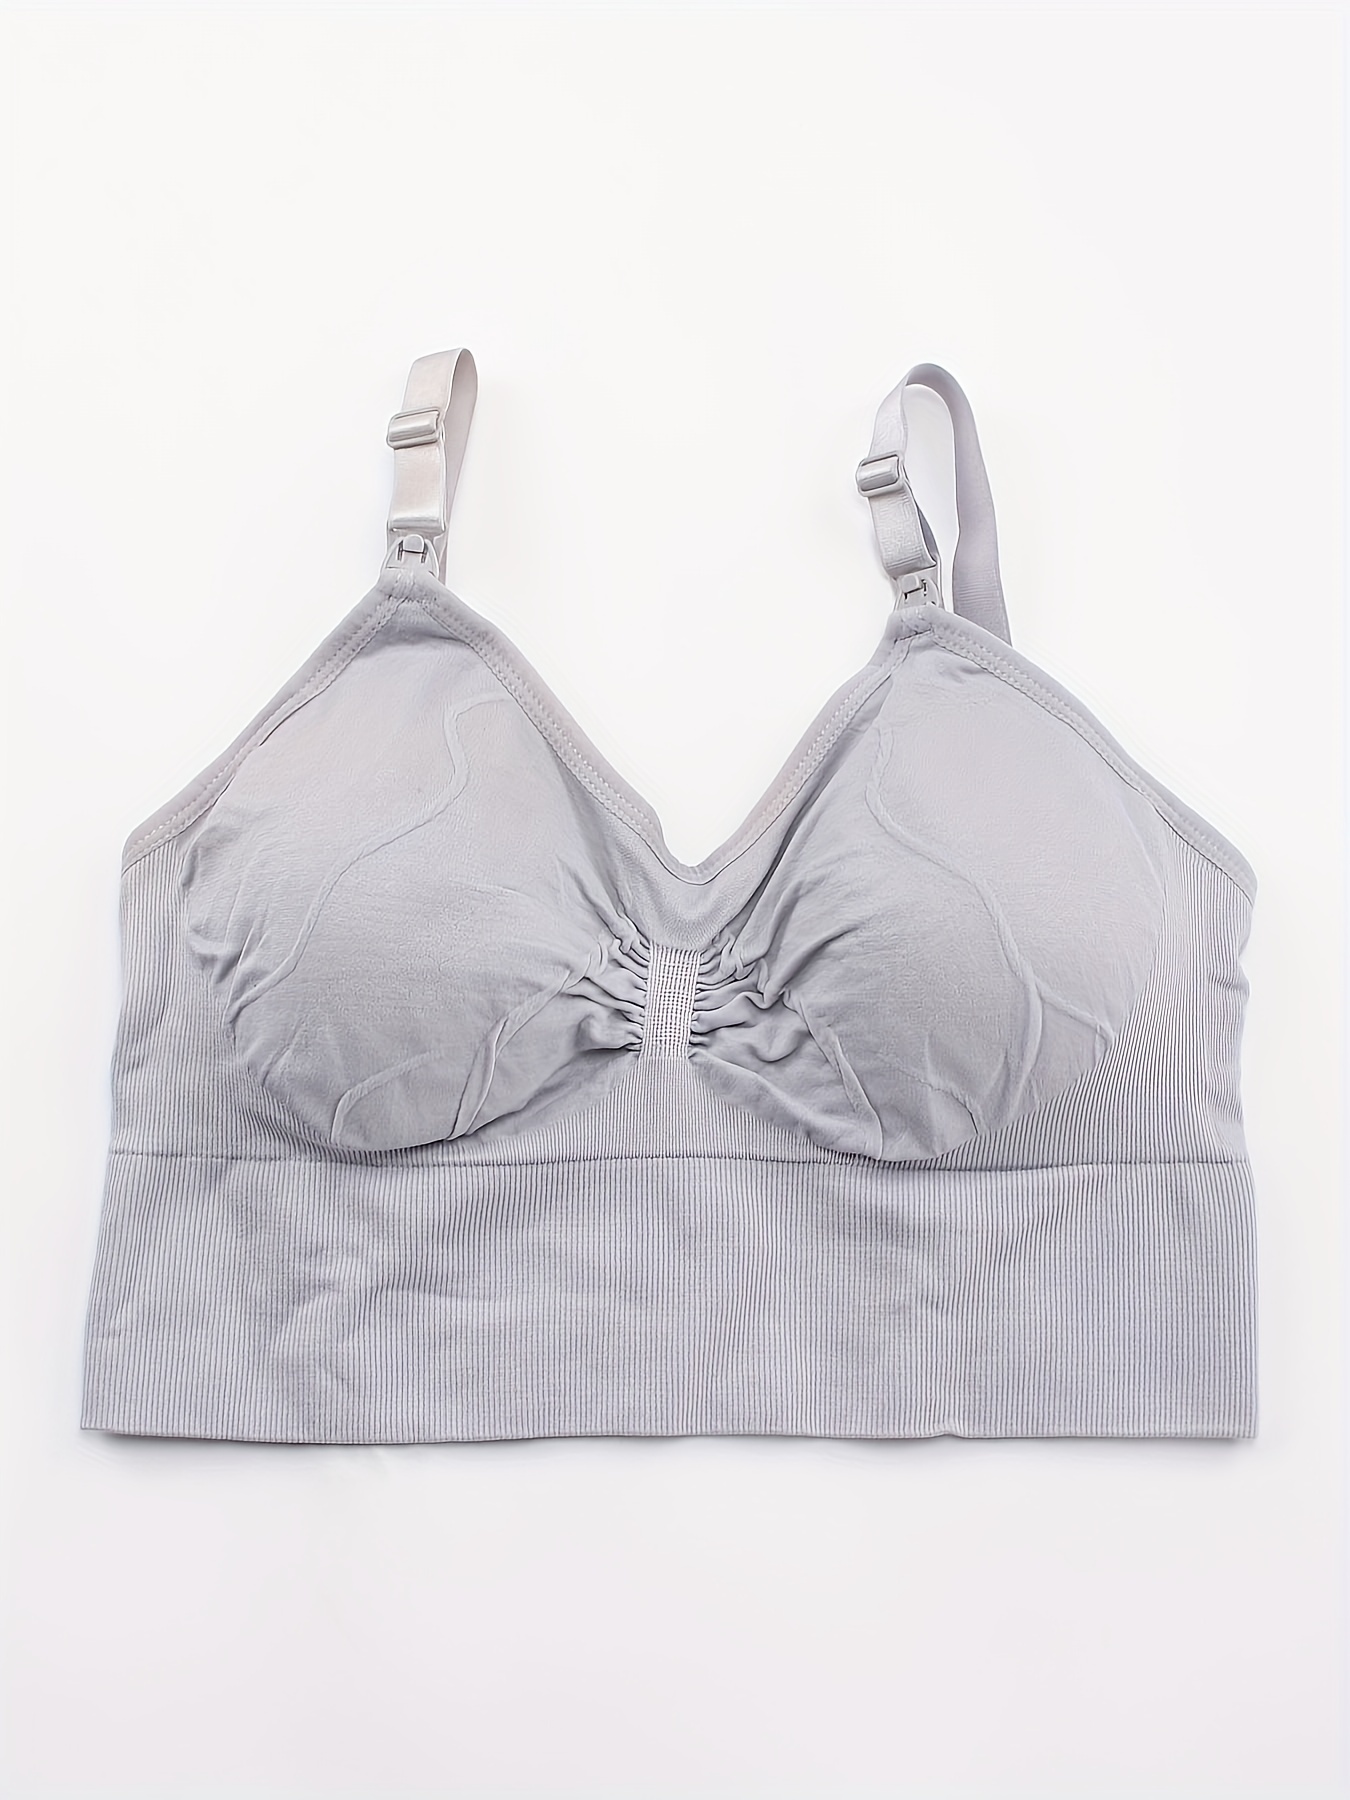 Average Busted Seamless Maternity And Nursing Bra (a-d Cup Sizes) - Grey,  Xl